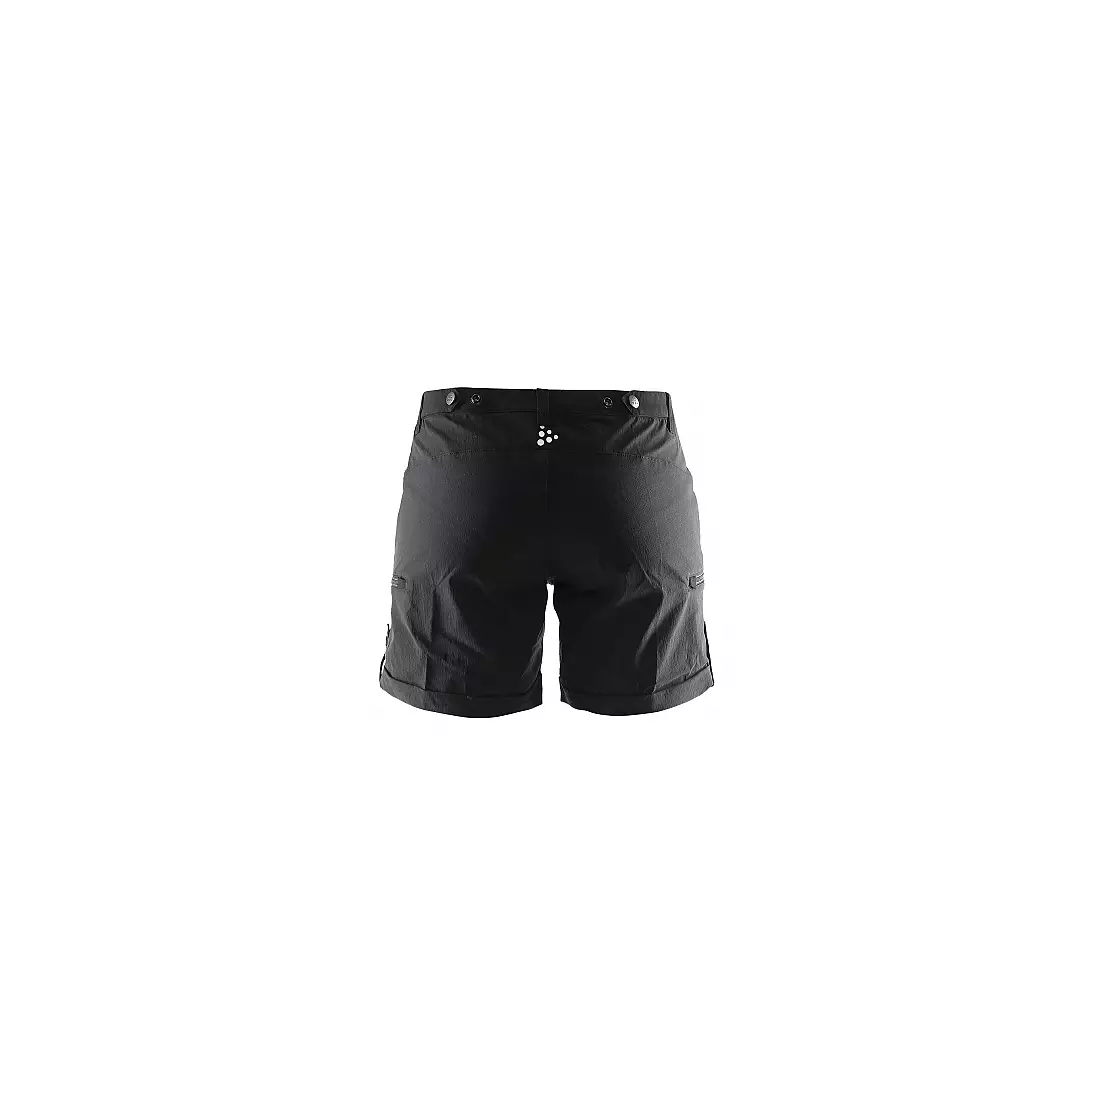 CRAFT IN THE ZONE - women's shorts 1902647-8999